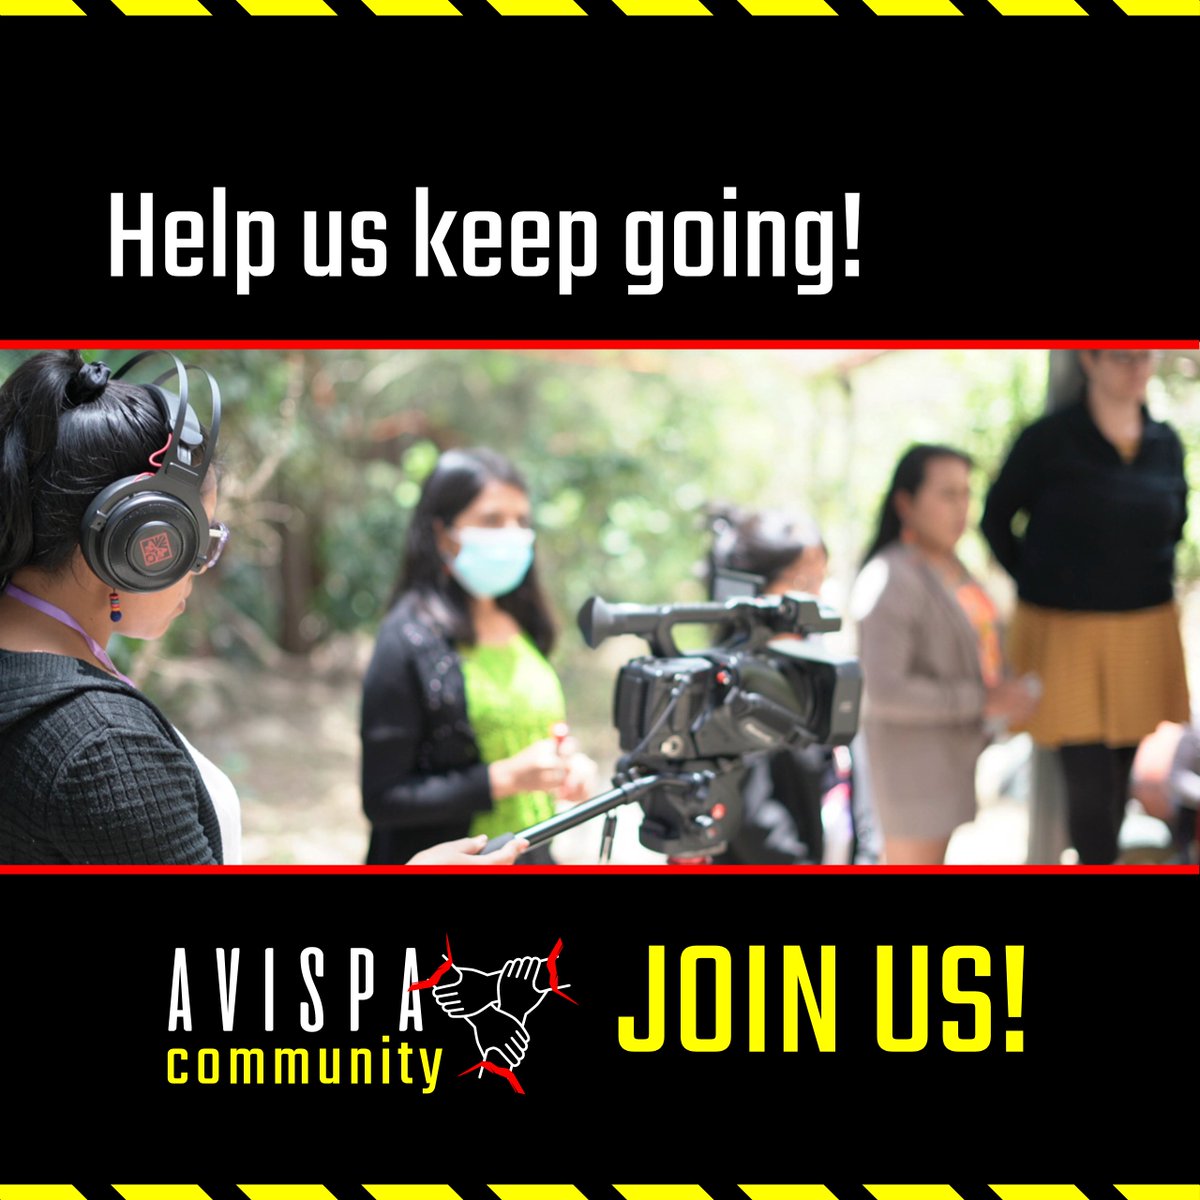 Supporting independent journalism means supporting the pursuit of truth, transparency, and democracy

👉 avispa.org/allies/🐝

#SupportIndependentJournalism #PressFreedom #IndependentMedia #JournalismMatters #IndependentPress #EthicalReporting #TruthToPower #FreePress #Press